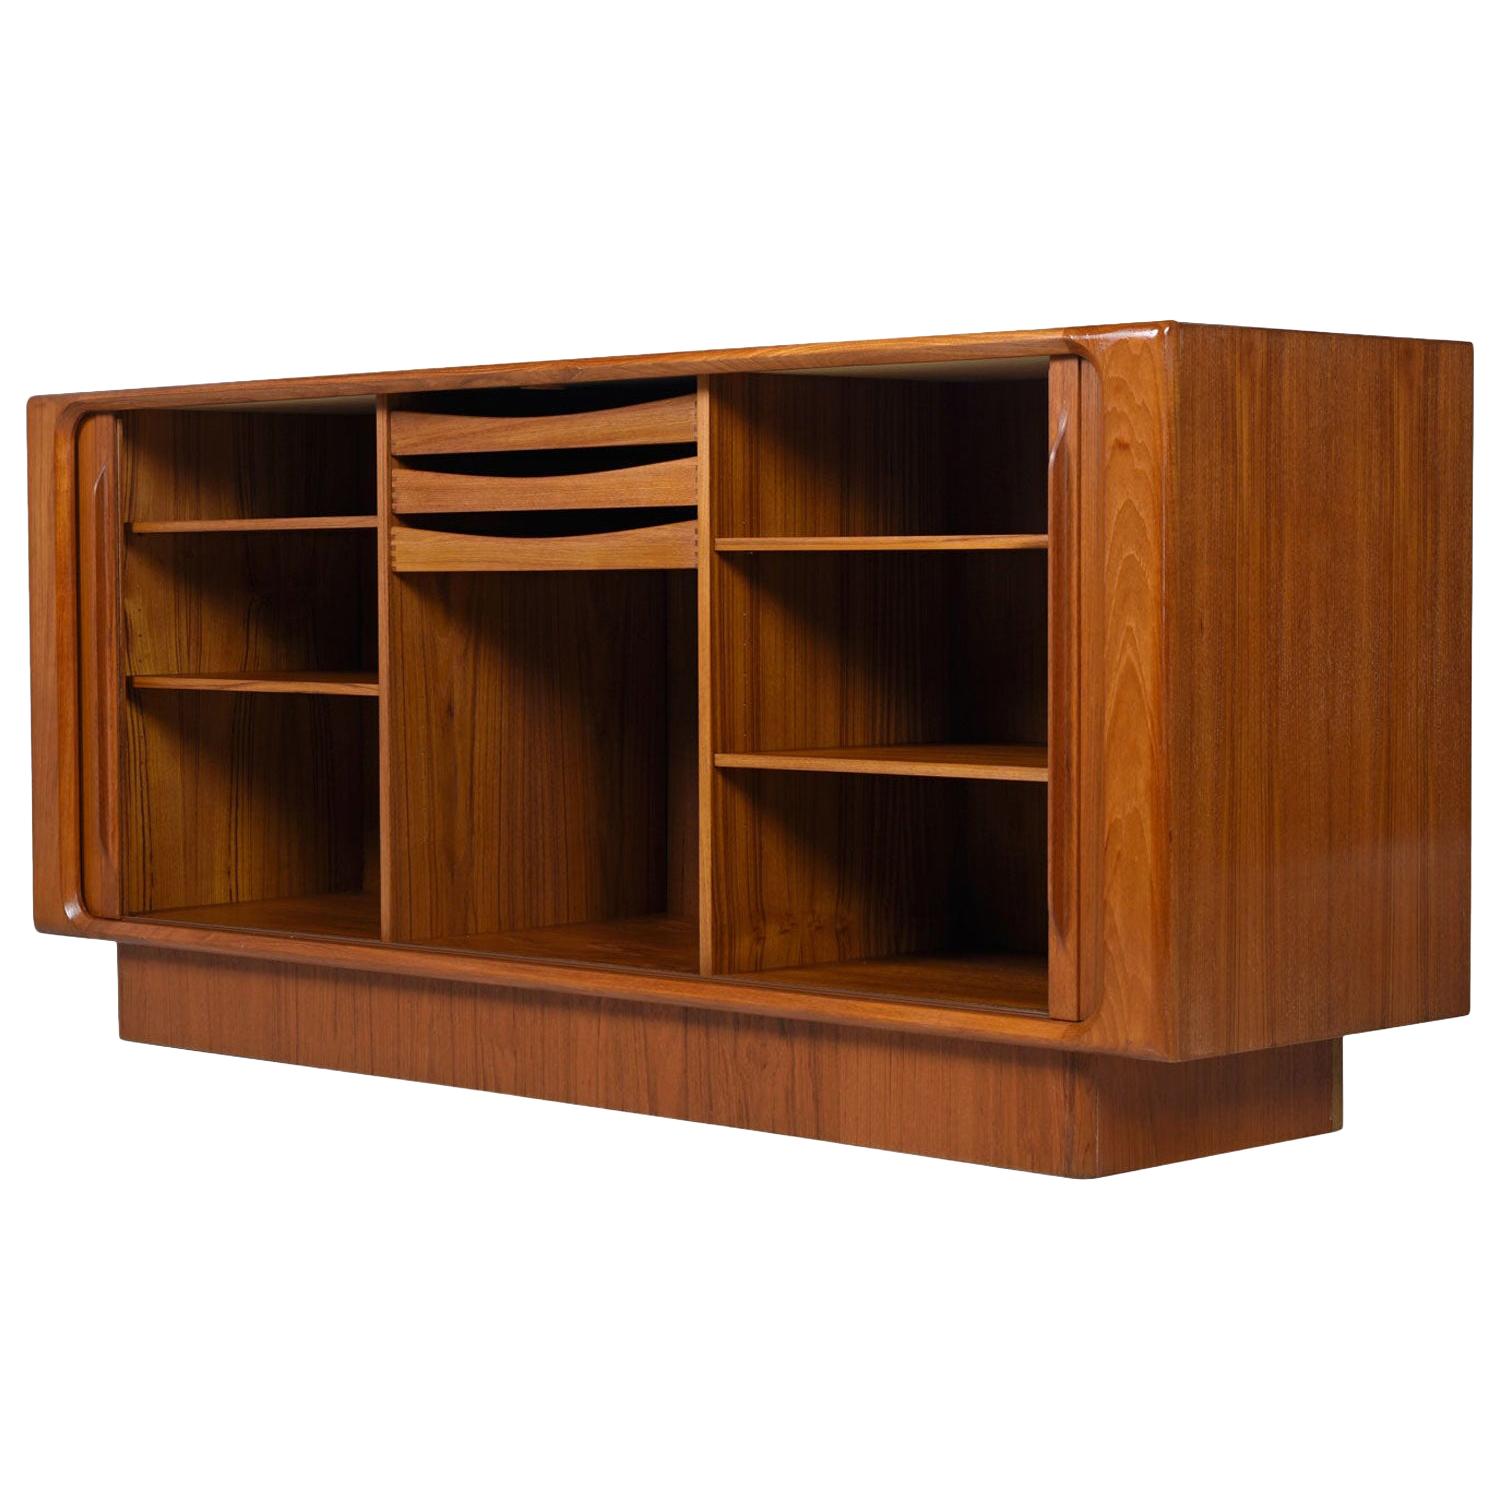 Exquisitely crafted vintage Danish teak chest by Bernhard Pedersen and Son. The back side is fully finished, ideal for open floor plans. This is the perfect media center. The large cabinet spaces provide amble room for 12? LP records and components.